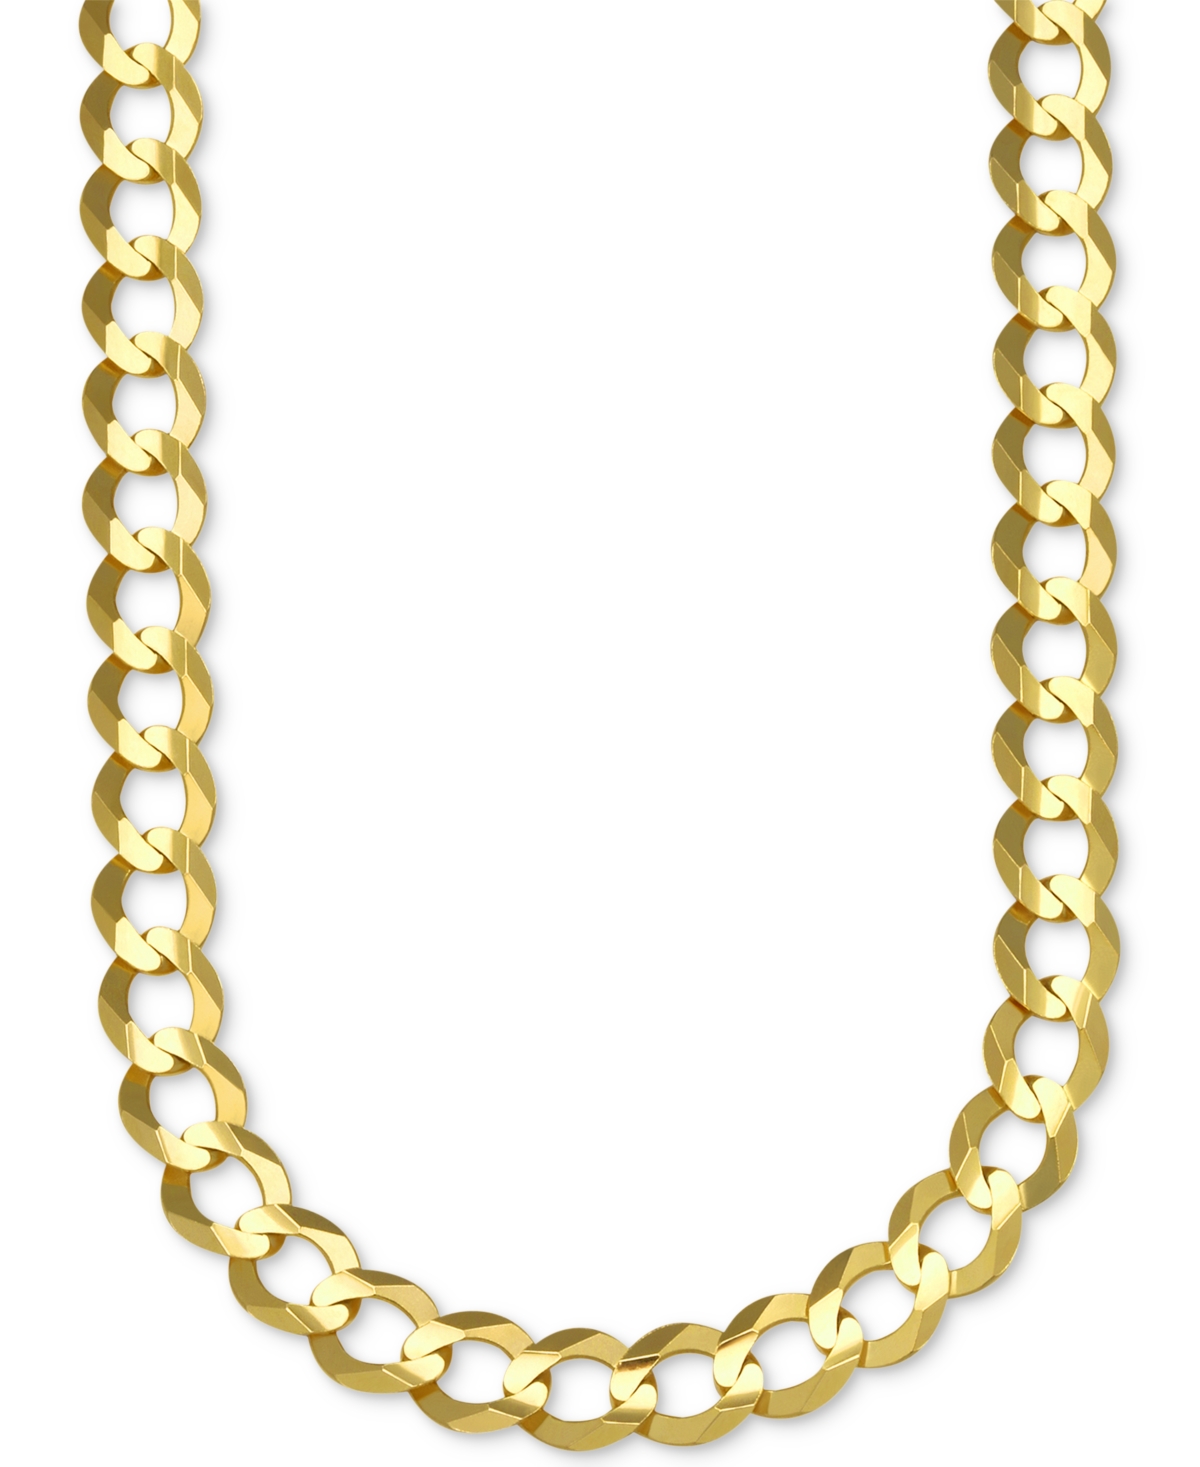 22" Open Curb Link Chain Necklace in Solid 10k Gold - Gold